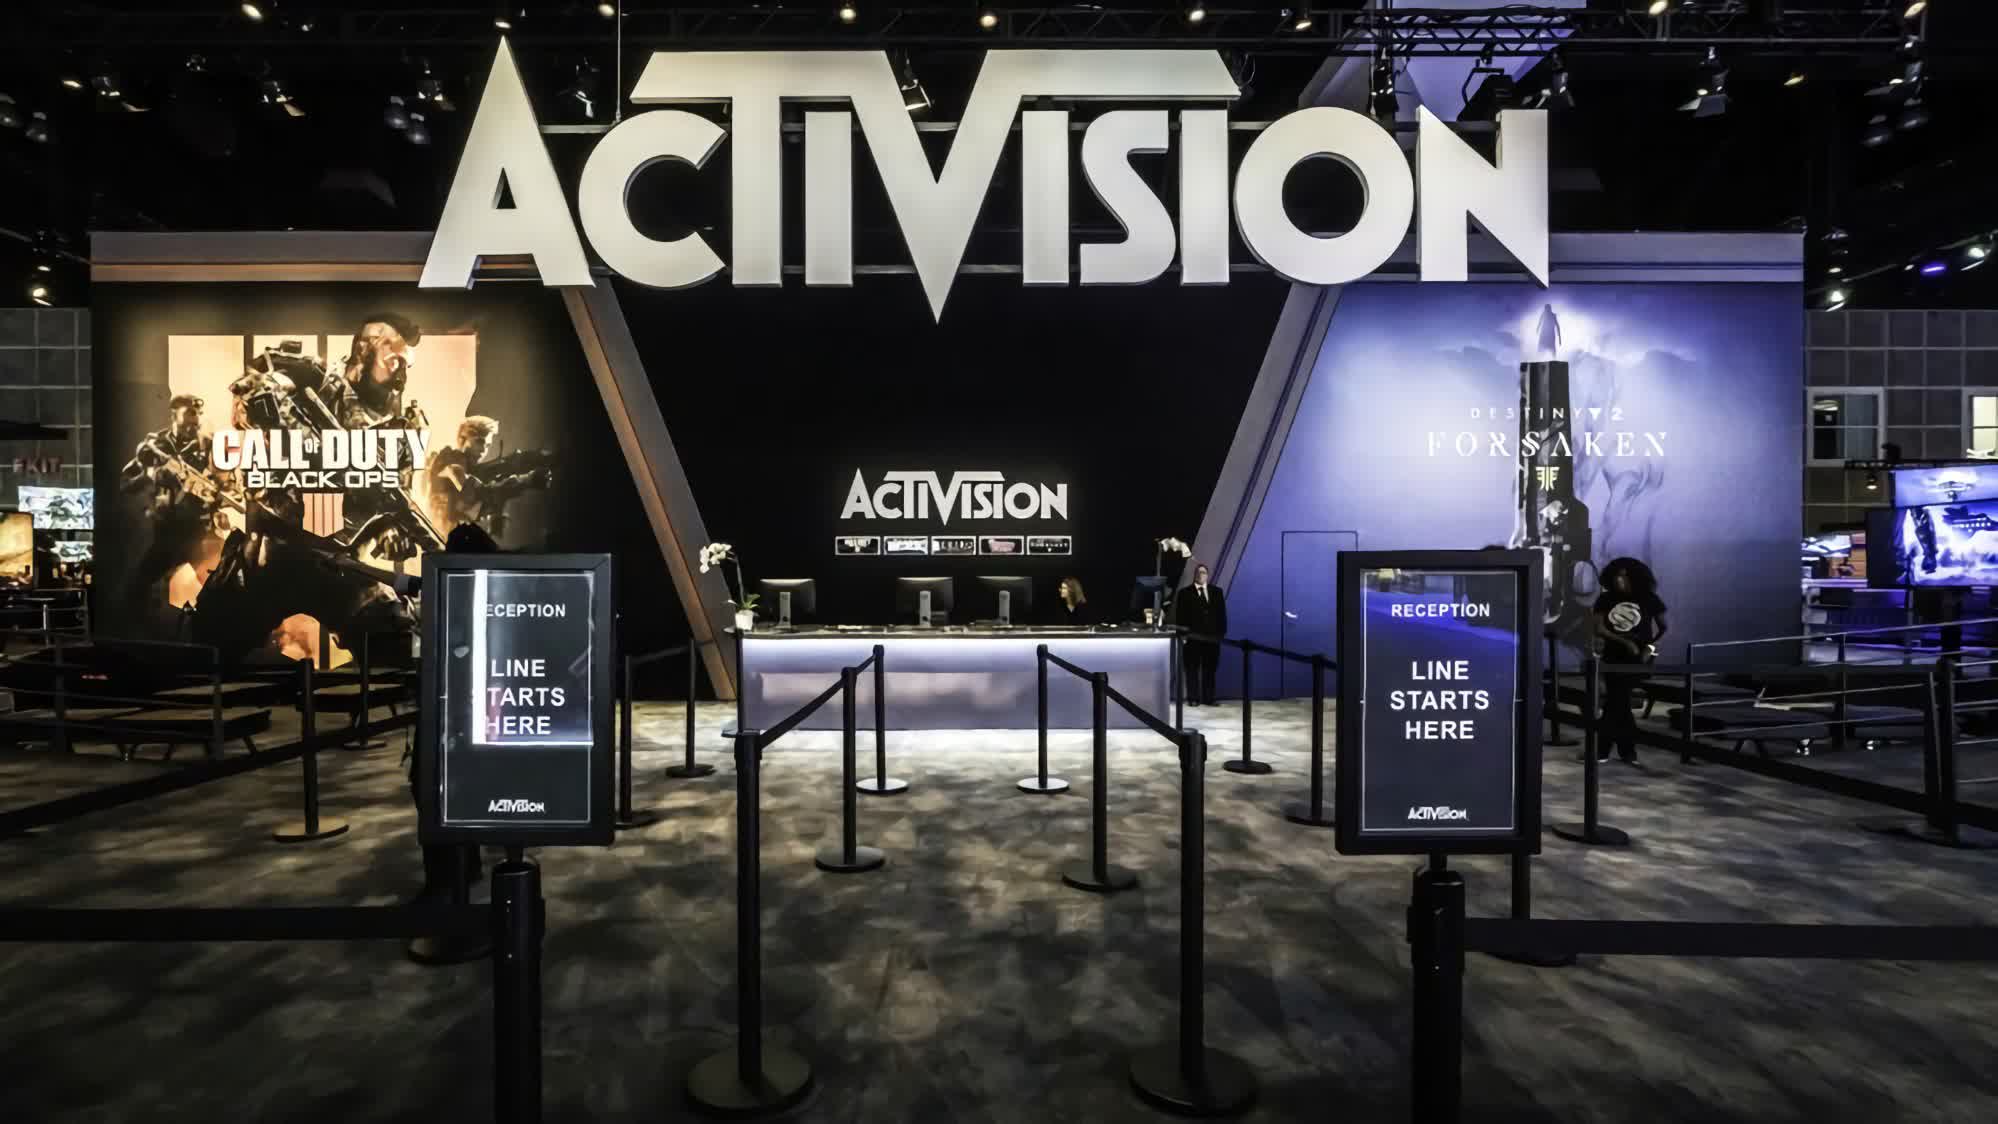 Activision's decision to pull out of China stemmed from a comment that was lost in translation